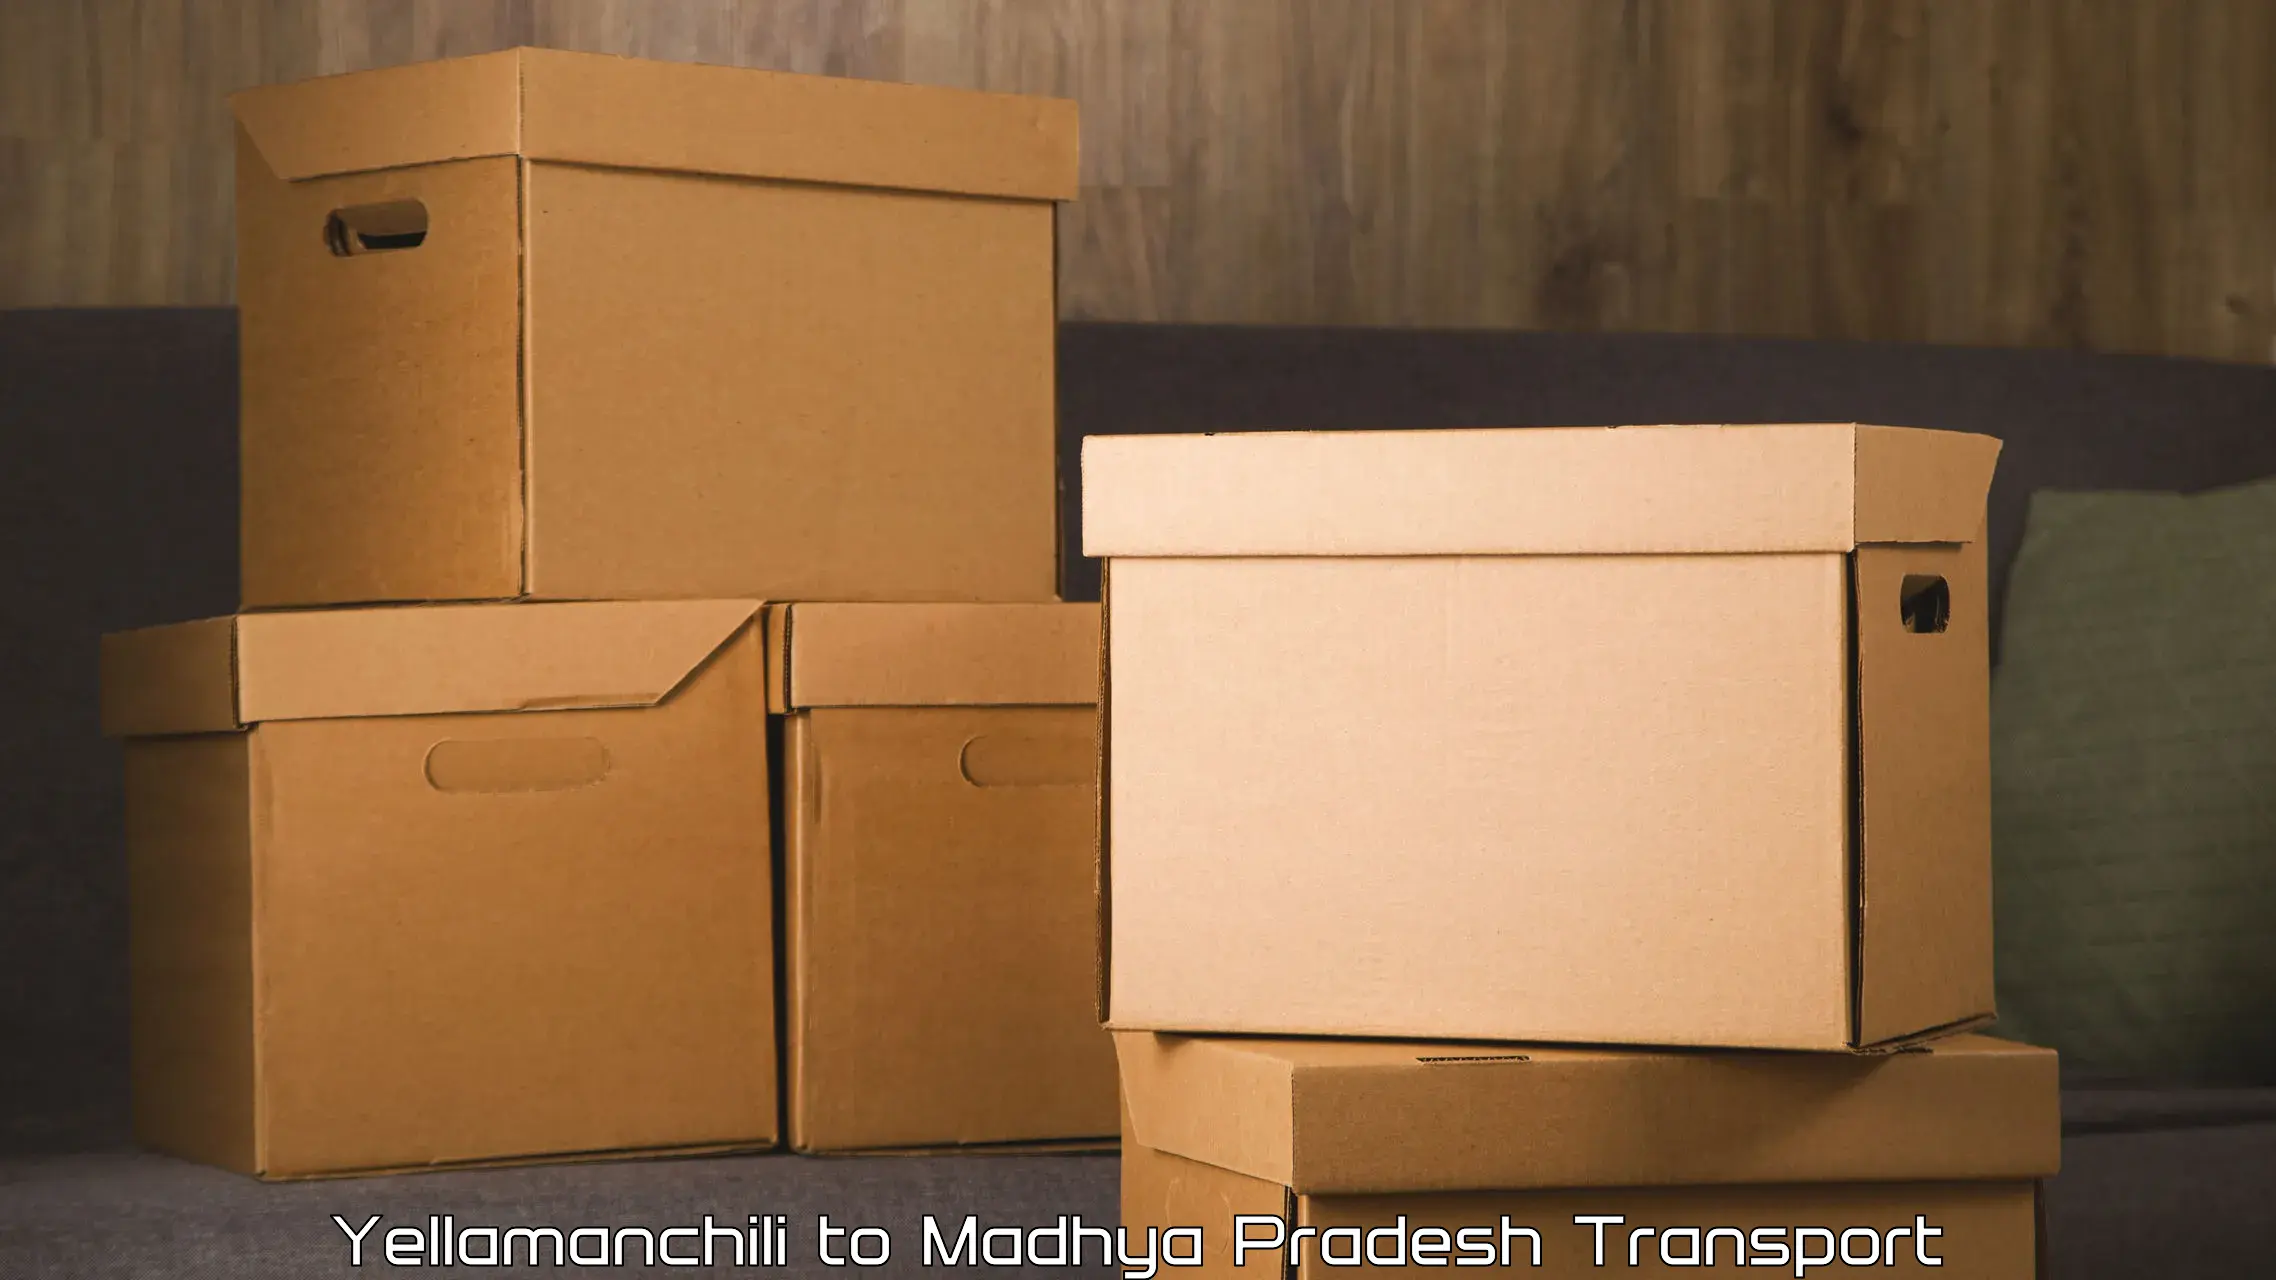 Best transport services in India Yellamanchili to Petlawad